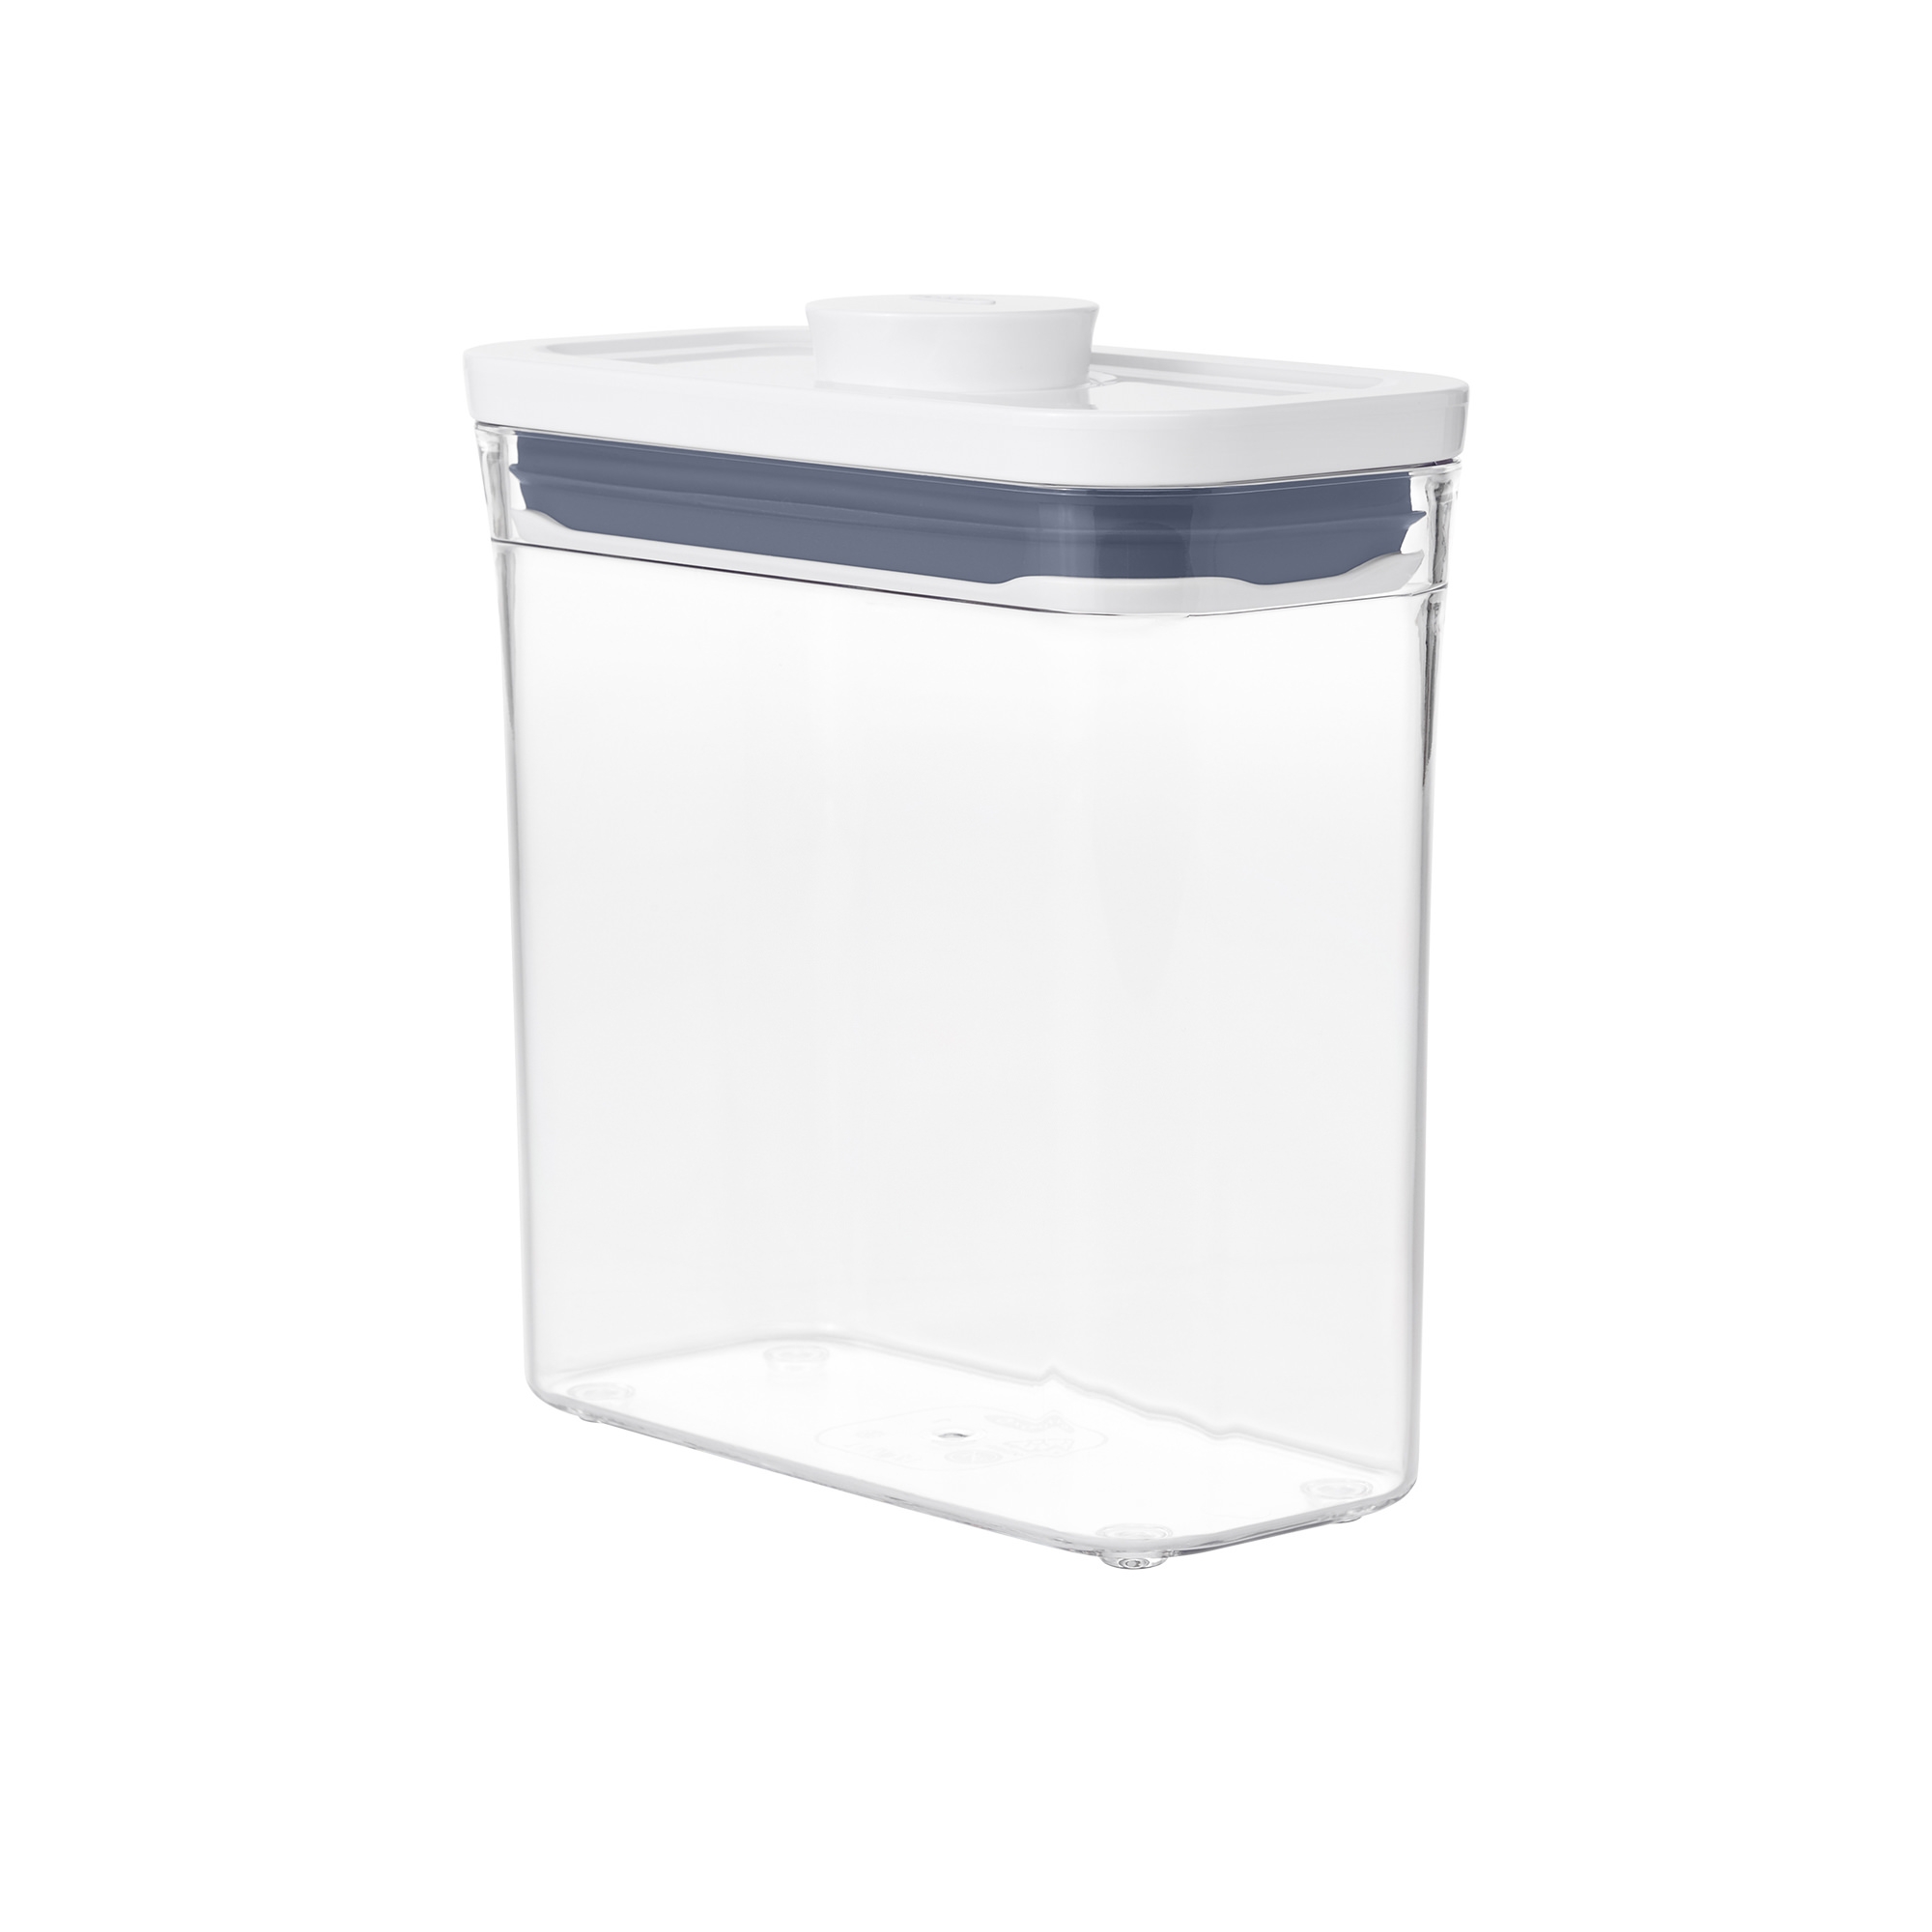 OXO Good Grips Rectangular Pop 2.0 Container 1.1L Image 1